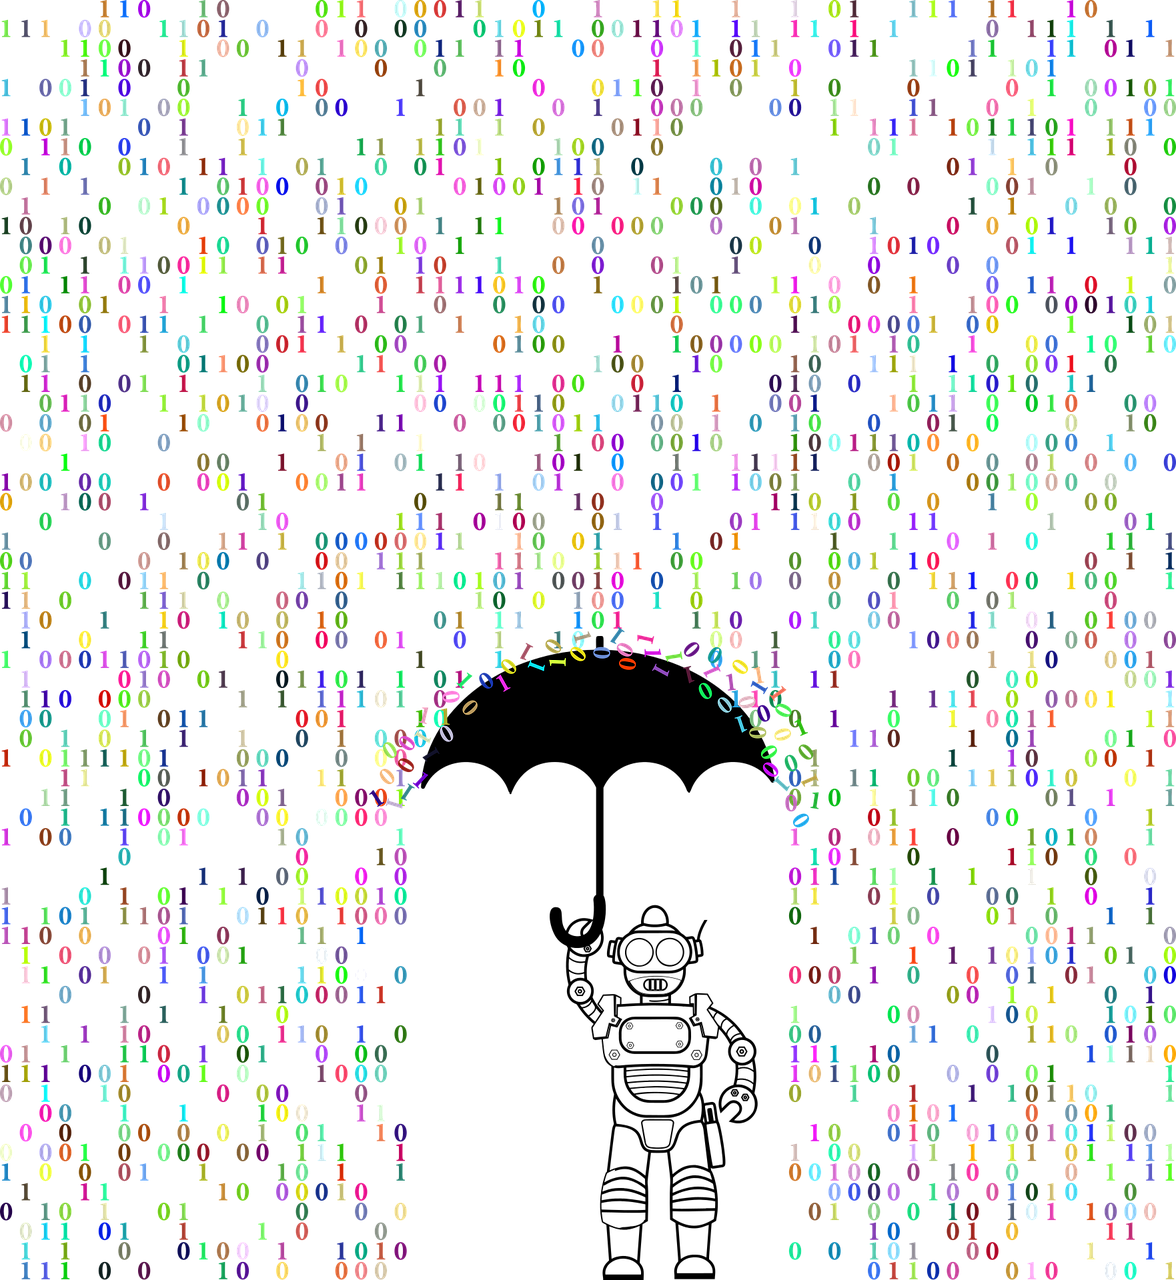 A robot stands holding a black umbrella underneath a shower of multicolored binary code.